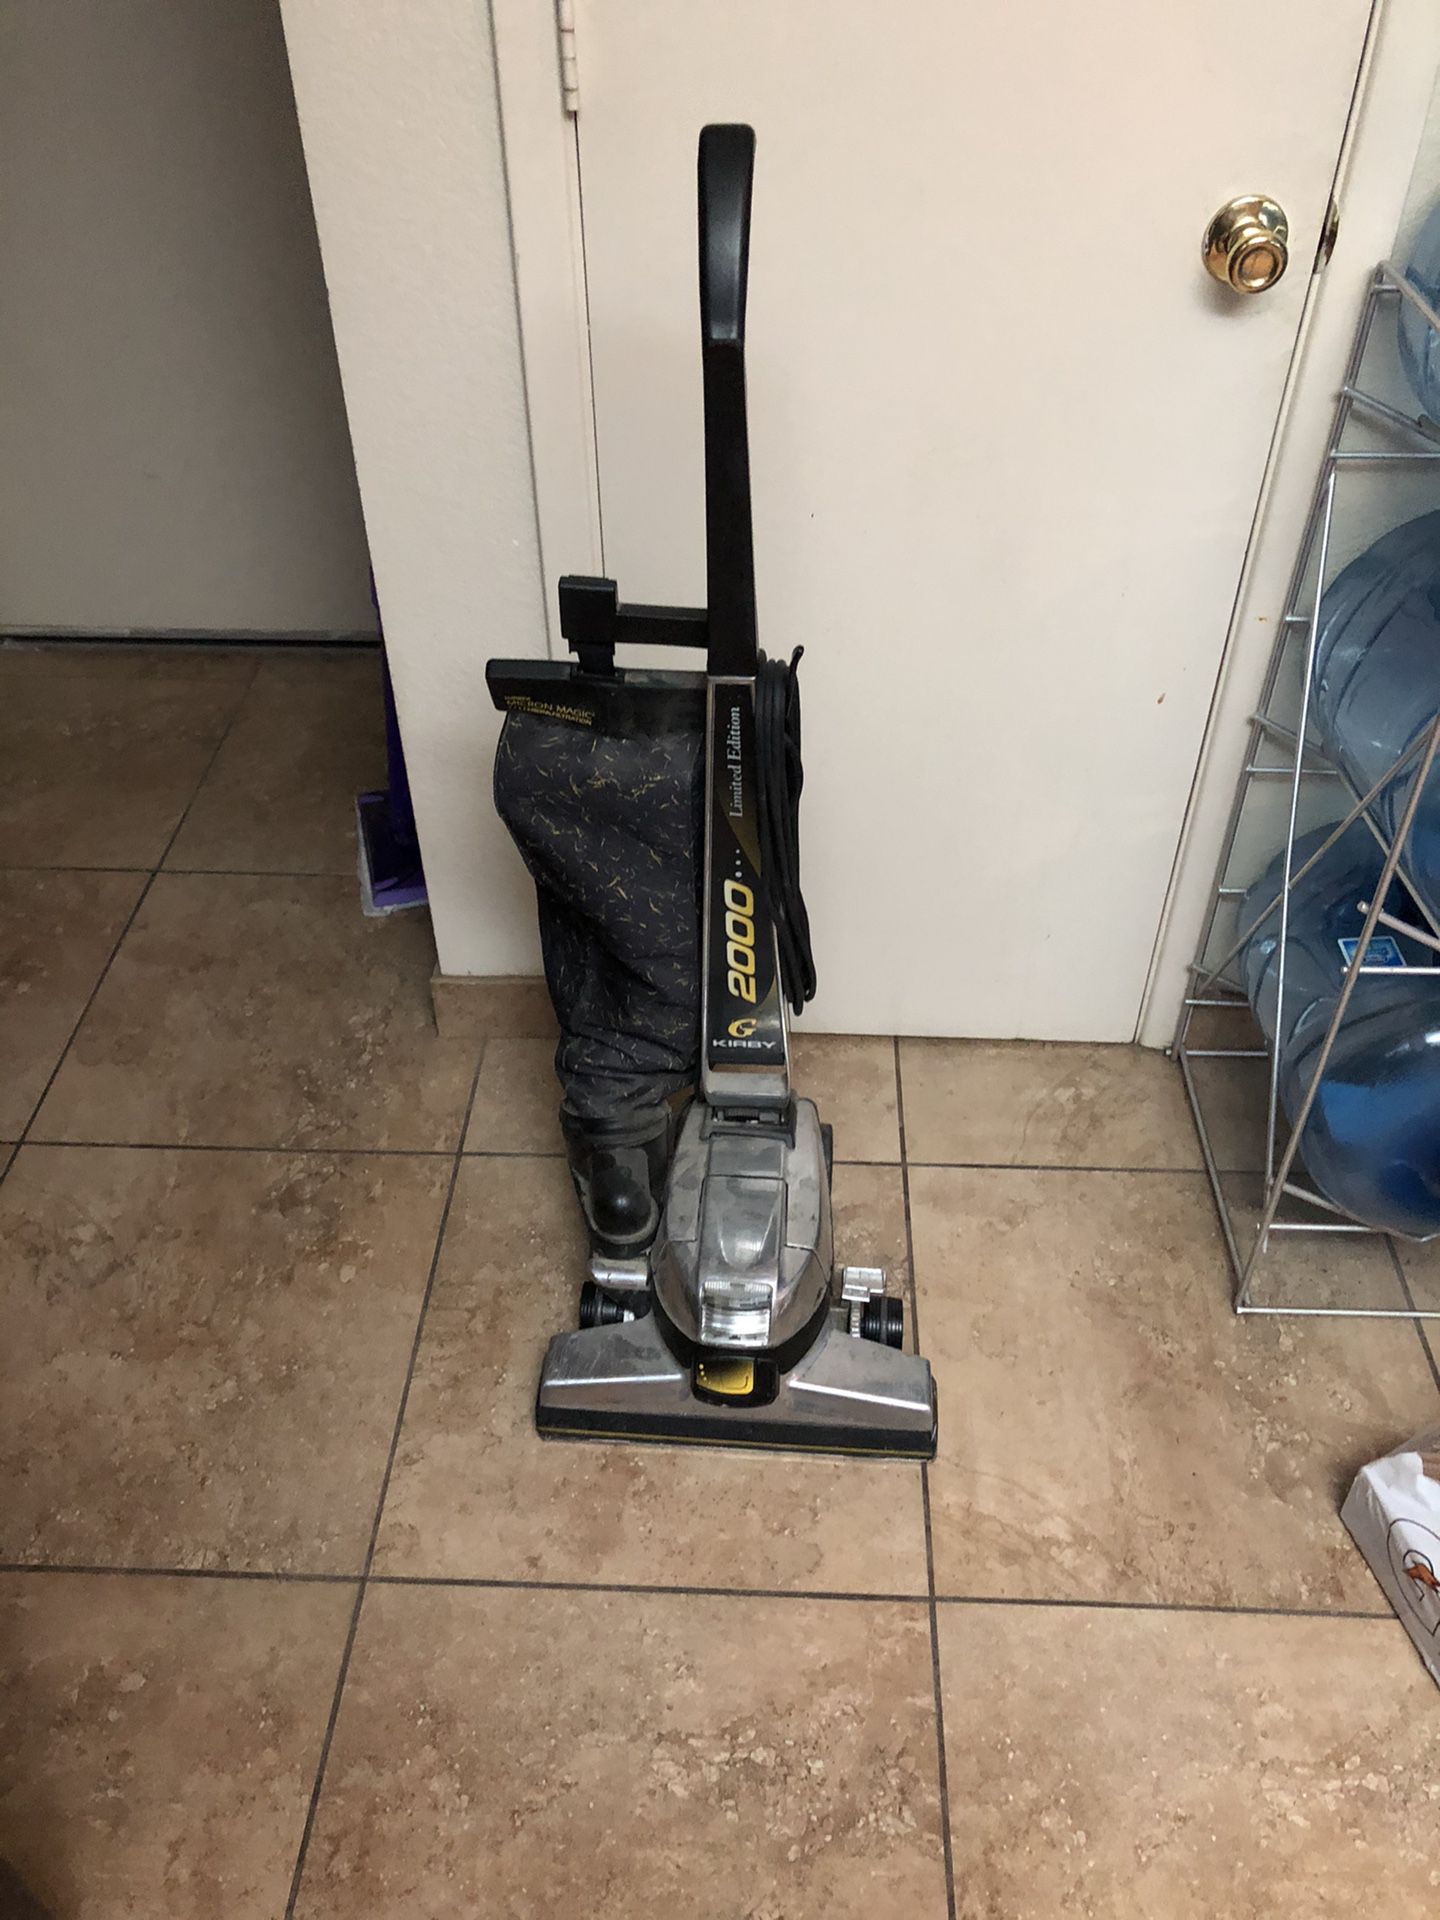 Kirby G6 vacuum / carpet shampooed with With accessories / carpet shampoo